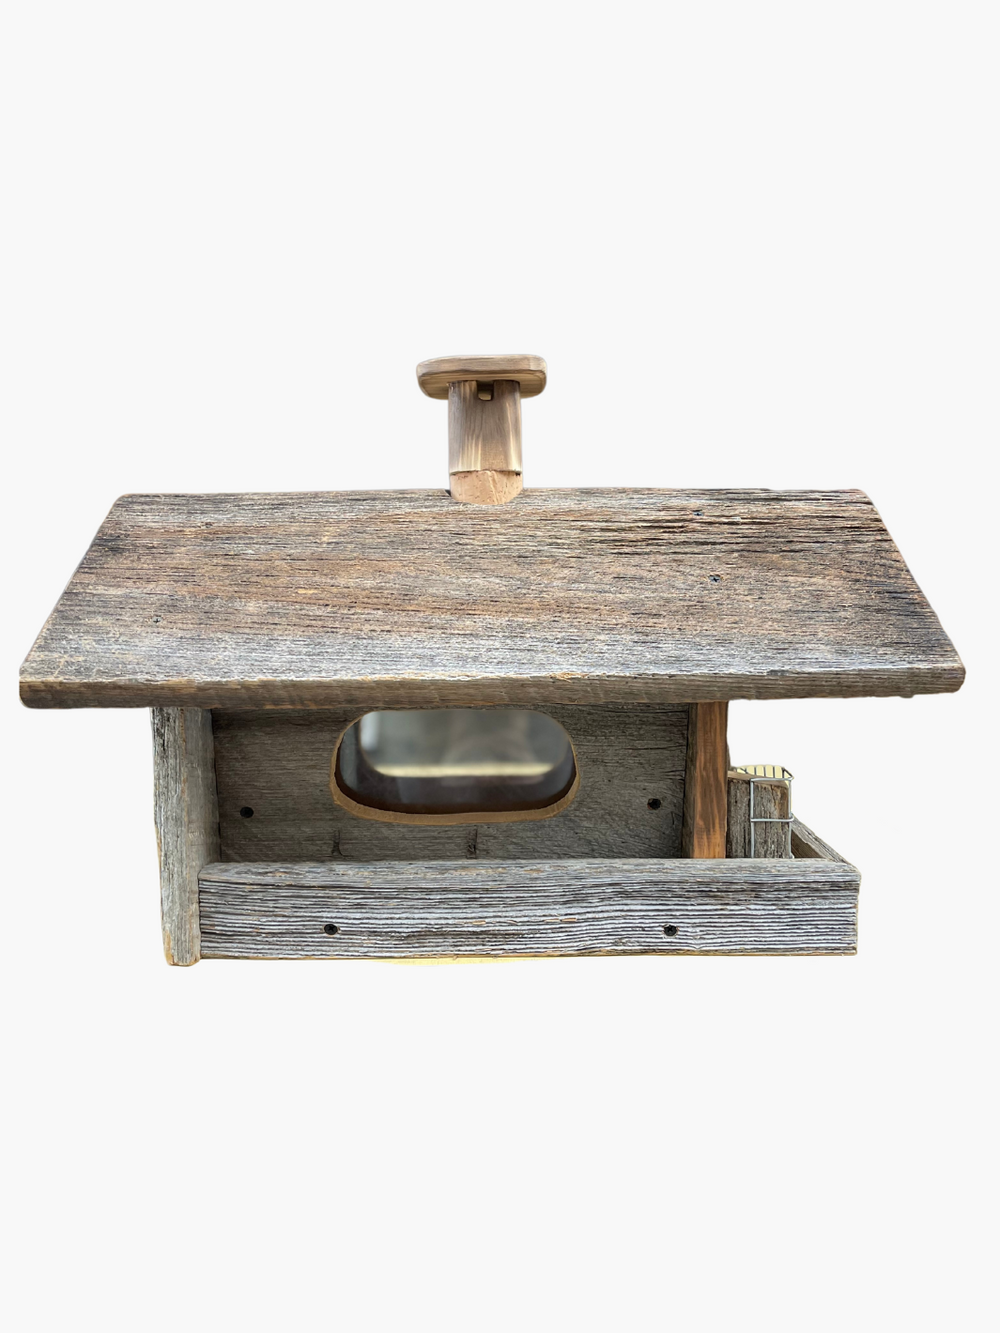 Barn Wood Feeder with Suet Cage